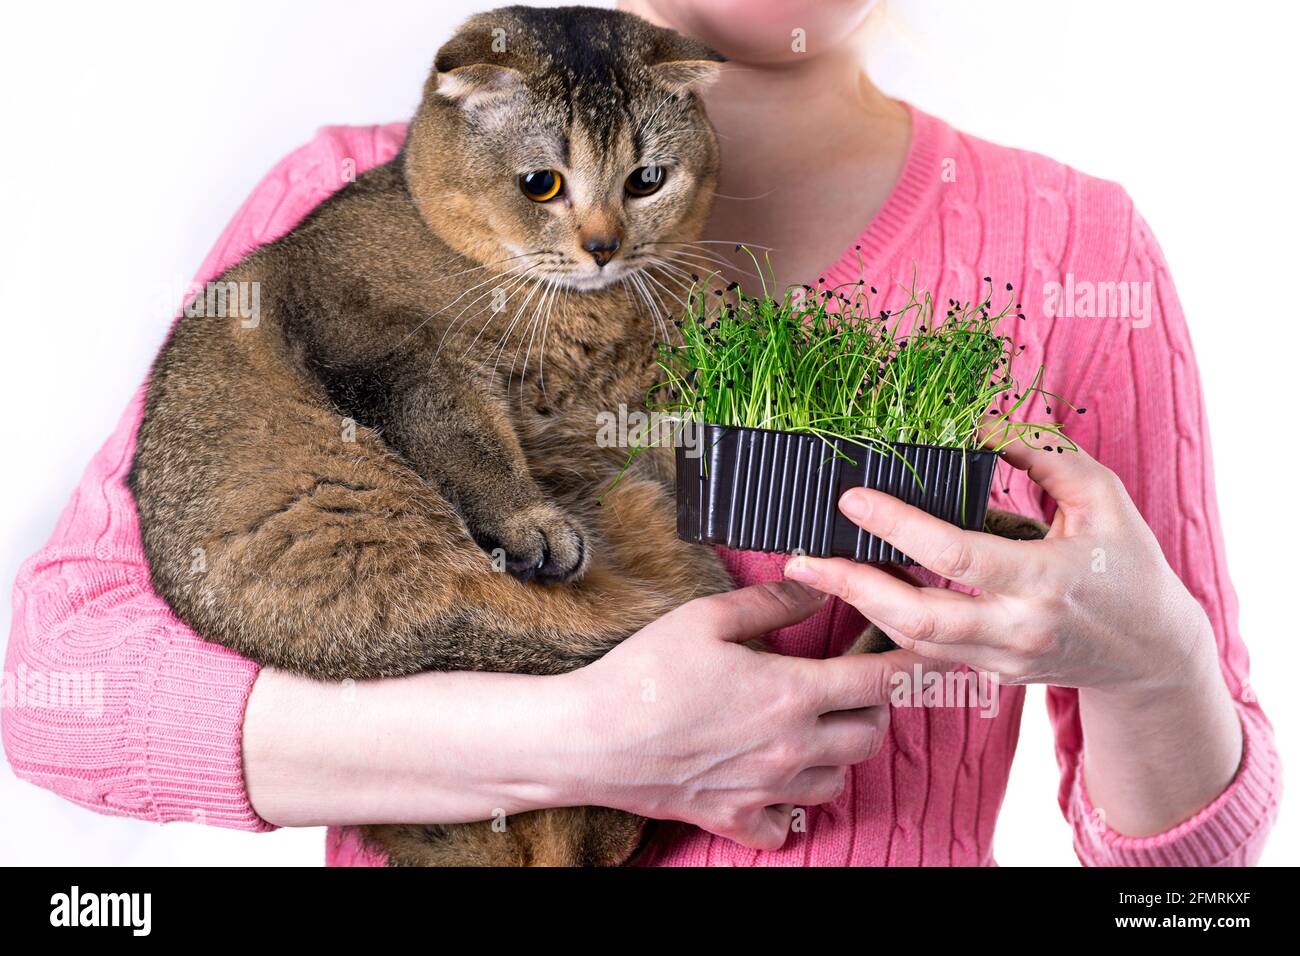 A woman holds a crop of microgreens in her hands and feeds a scottish fold cat with young sprouts of onions. Stock Photo